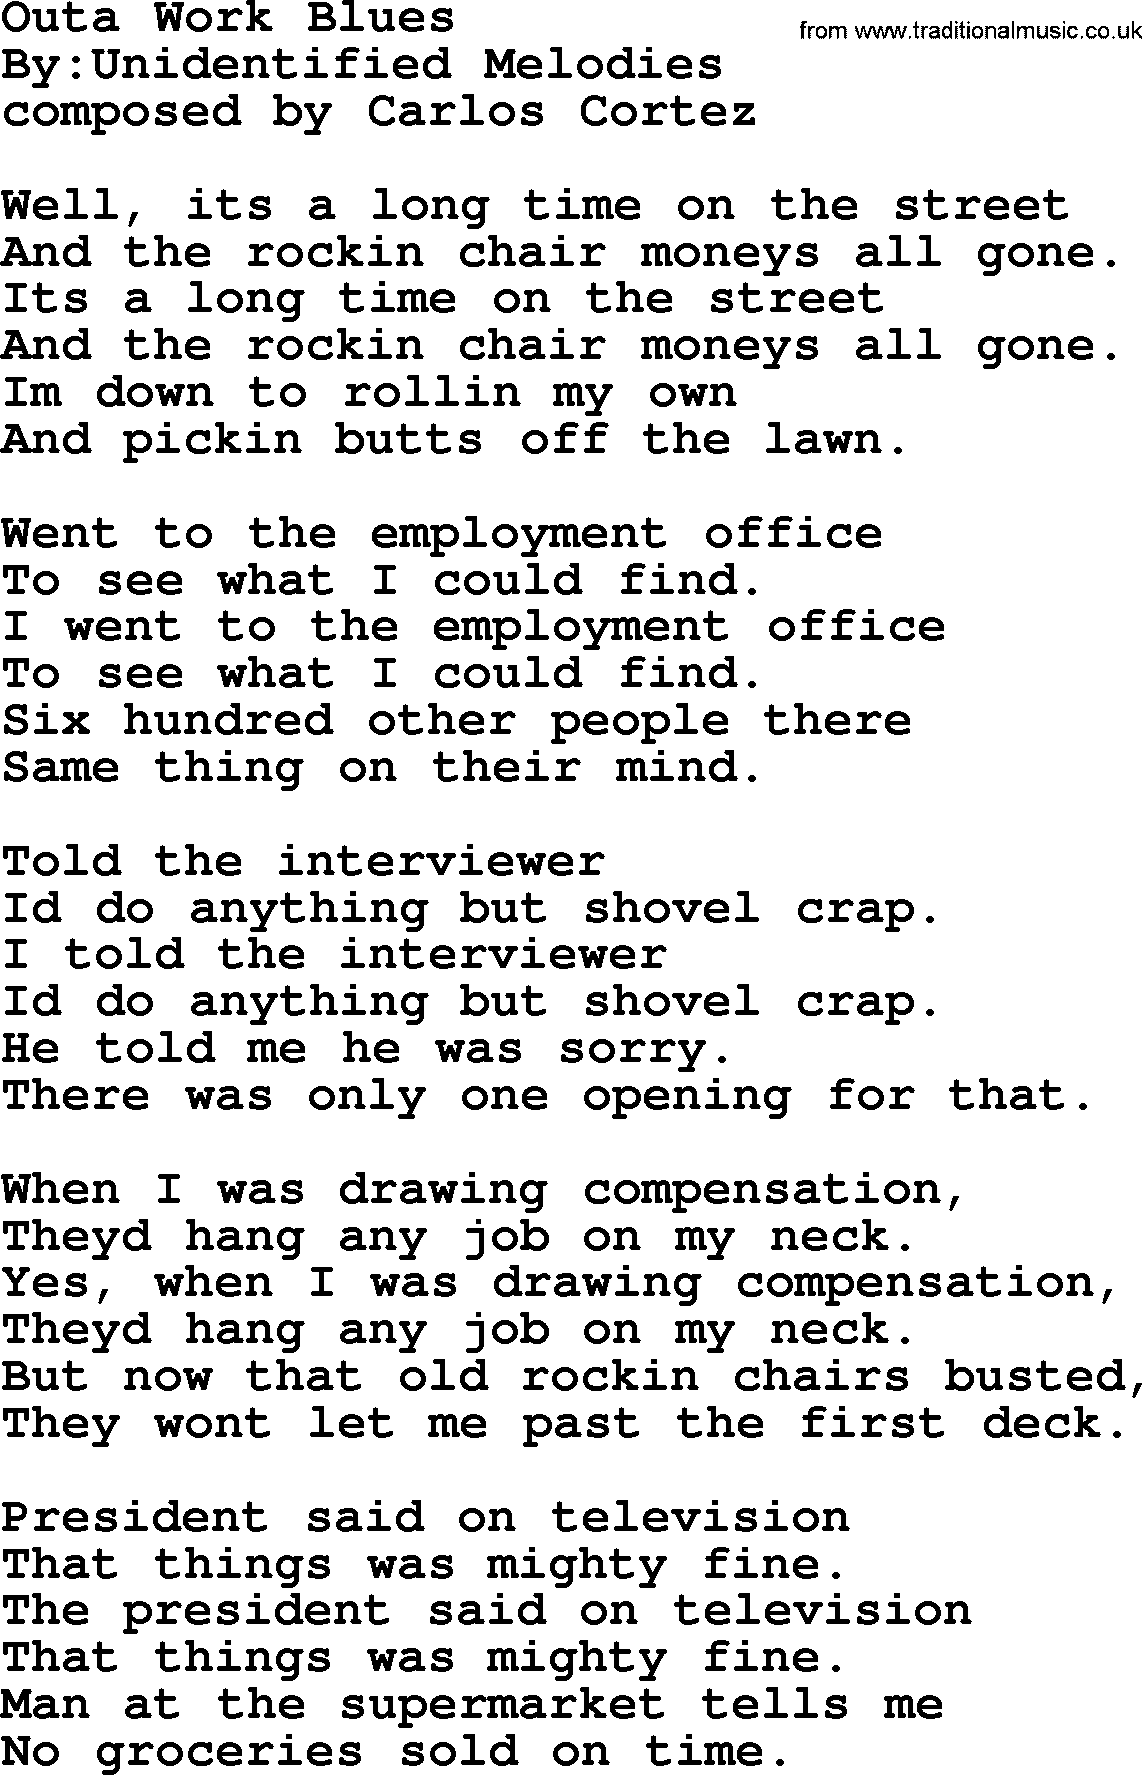 Political, Solidarity, Workers or Union song: Outa Work Blues, lyrics